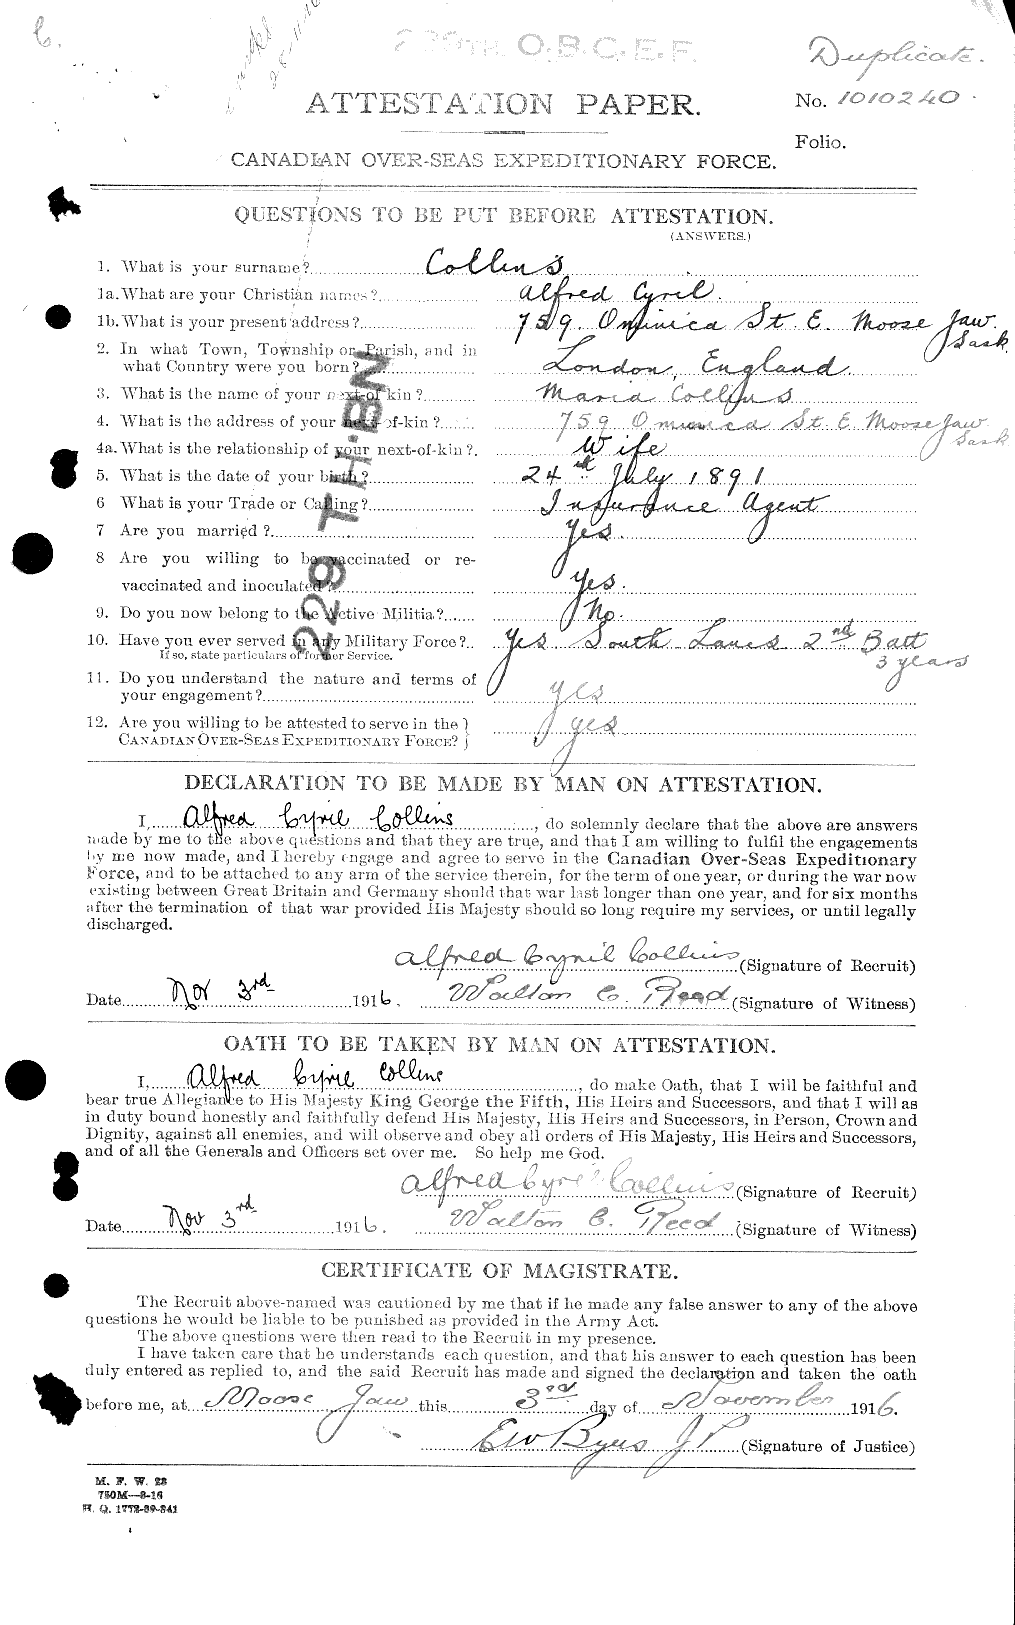 Personnel Records of the First World War - CEF 028952a